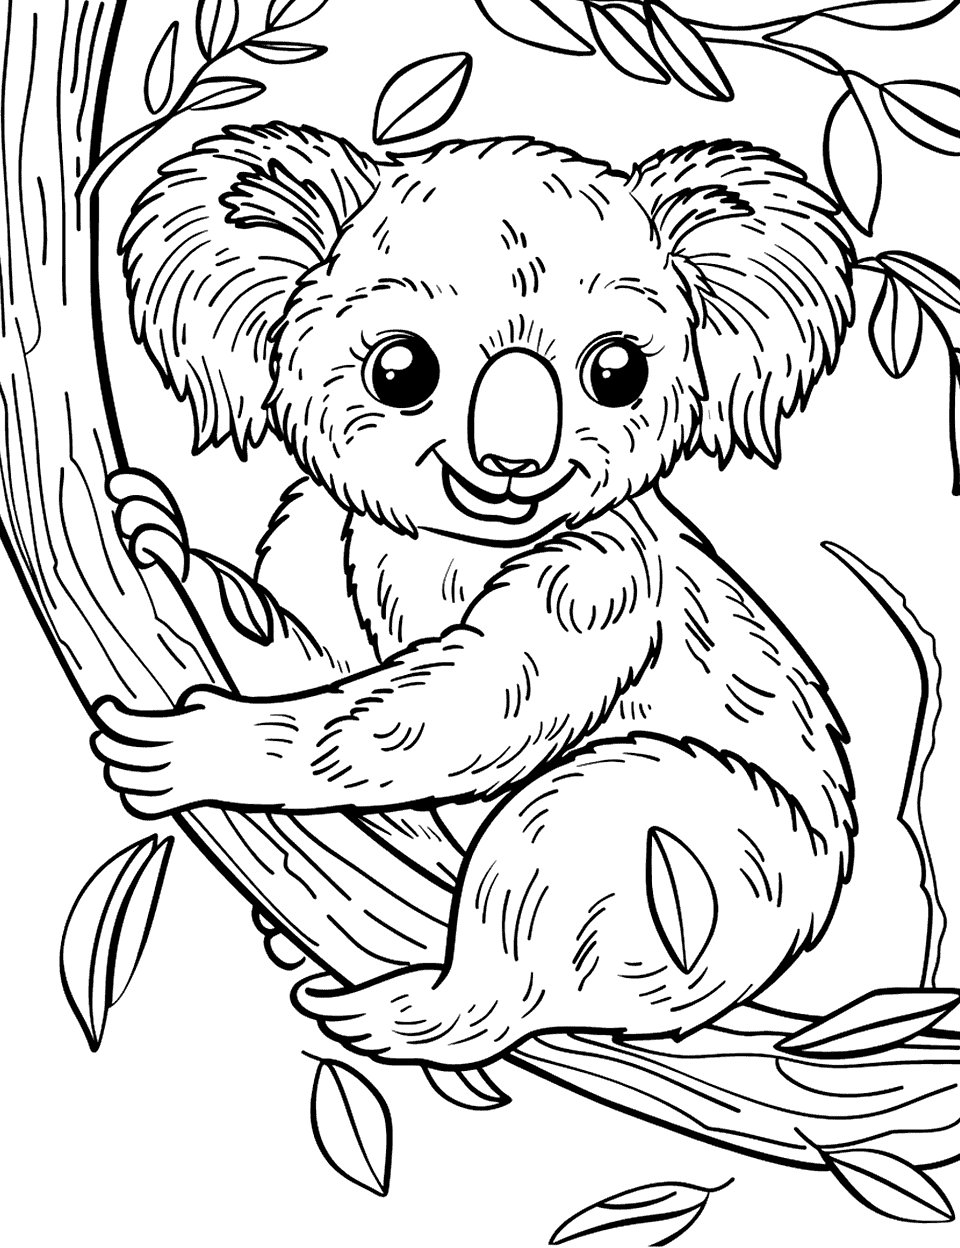 Koala Playing with Leaves Coloring Page - A playful koala playfully tossing eucalyptus leaves from the tree.